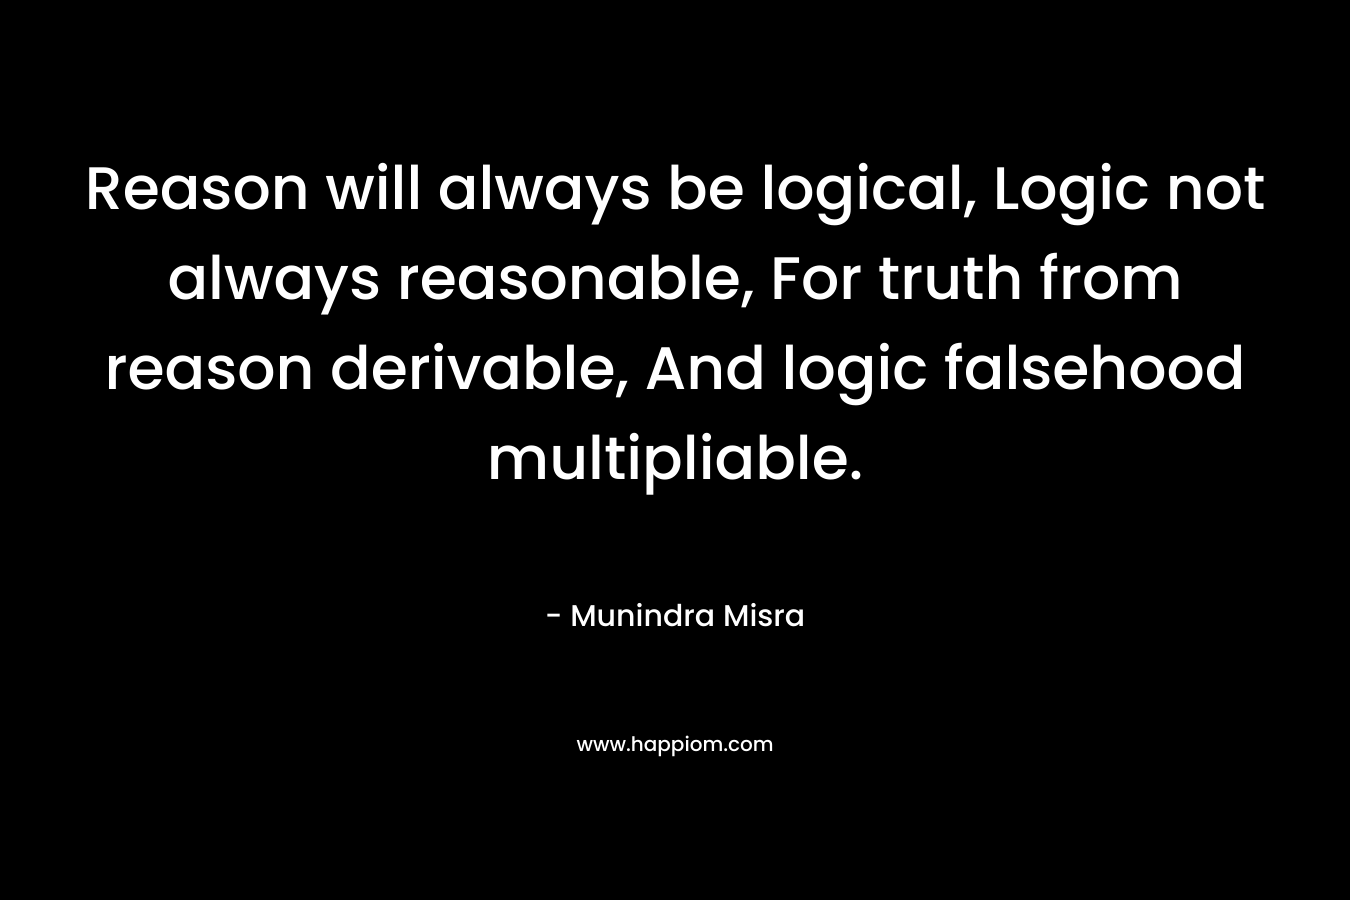 Reason will always be logical, Logic not always reasonable, For truth from reason derivable, And logic falsehood multipliable.